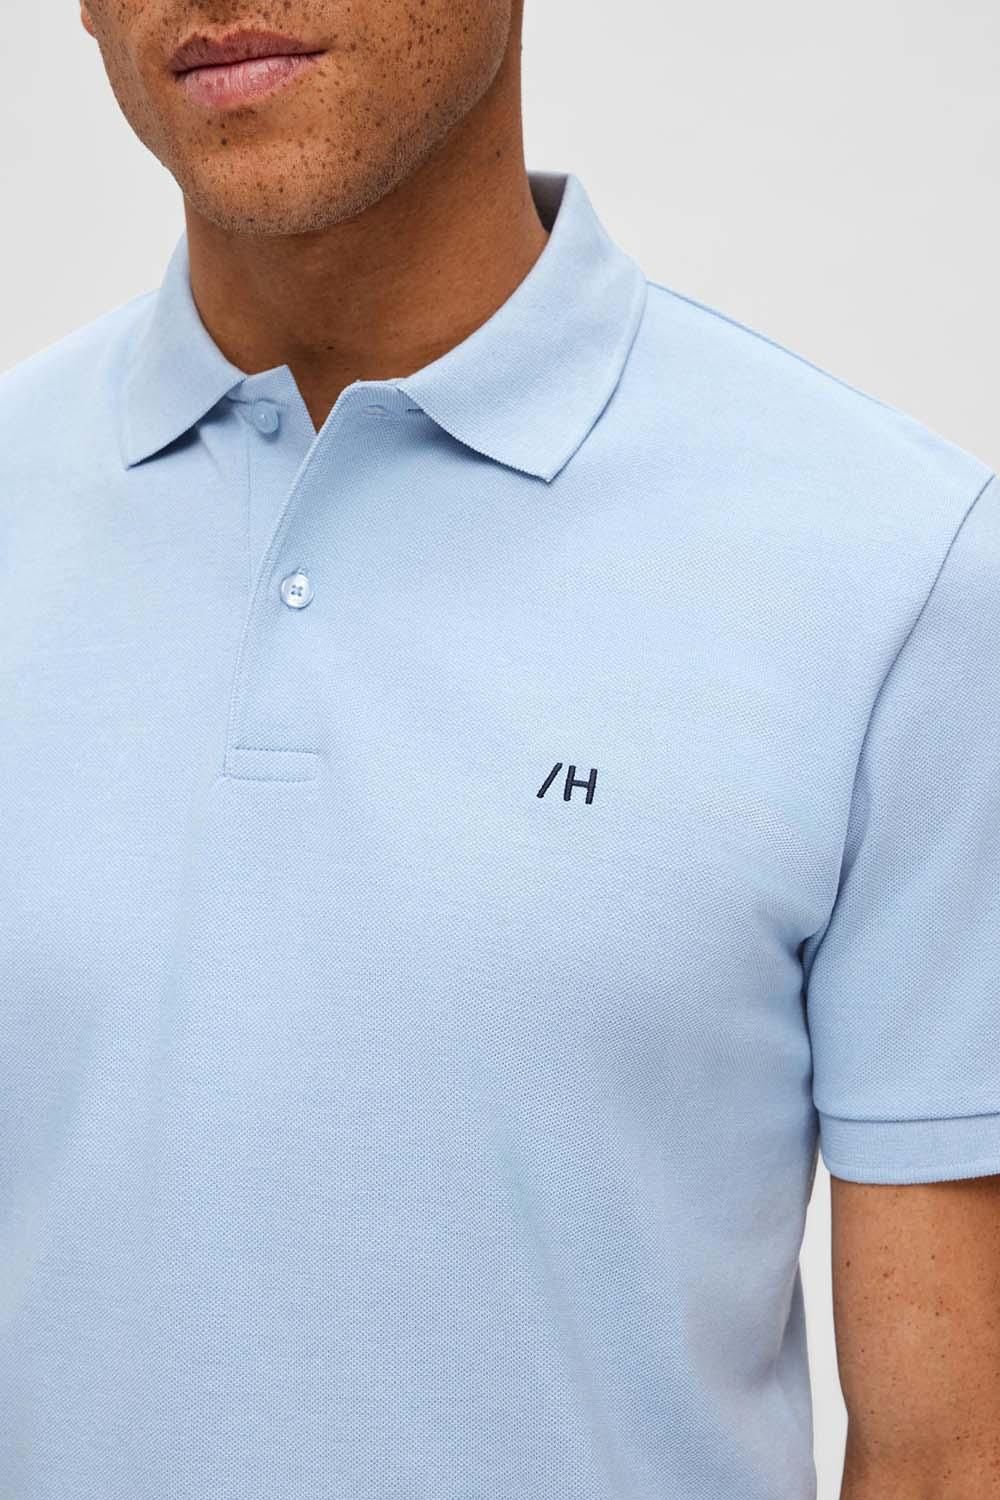 Selected Homme Polo Lichtblauw